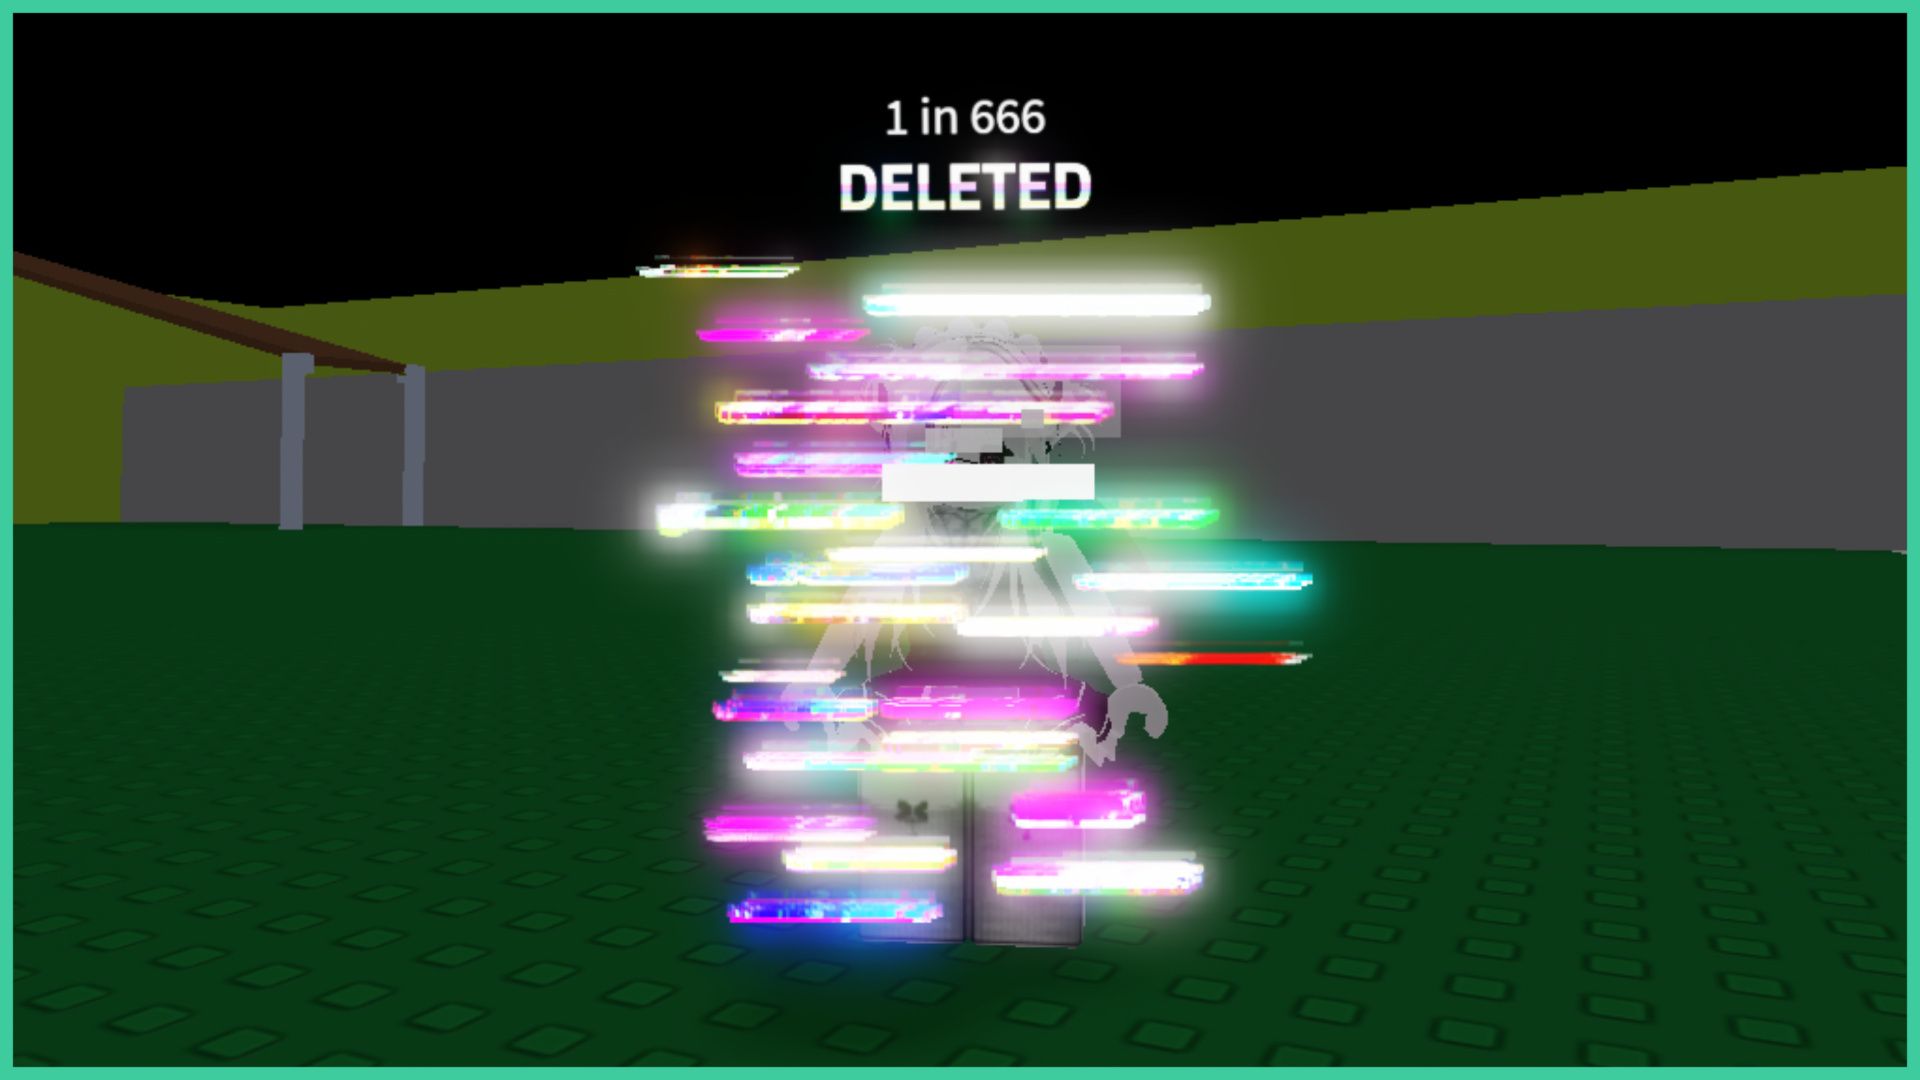 feature image for our hade's rng rarest auras guide, the aura the roblox player is wearing has a glitched effect, with multiple lines across them that look like pixelated sections of multiple colours, the name of the aura is above the player which says 'deleted 1 in 666'